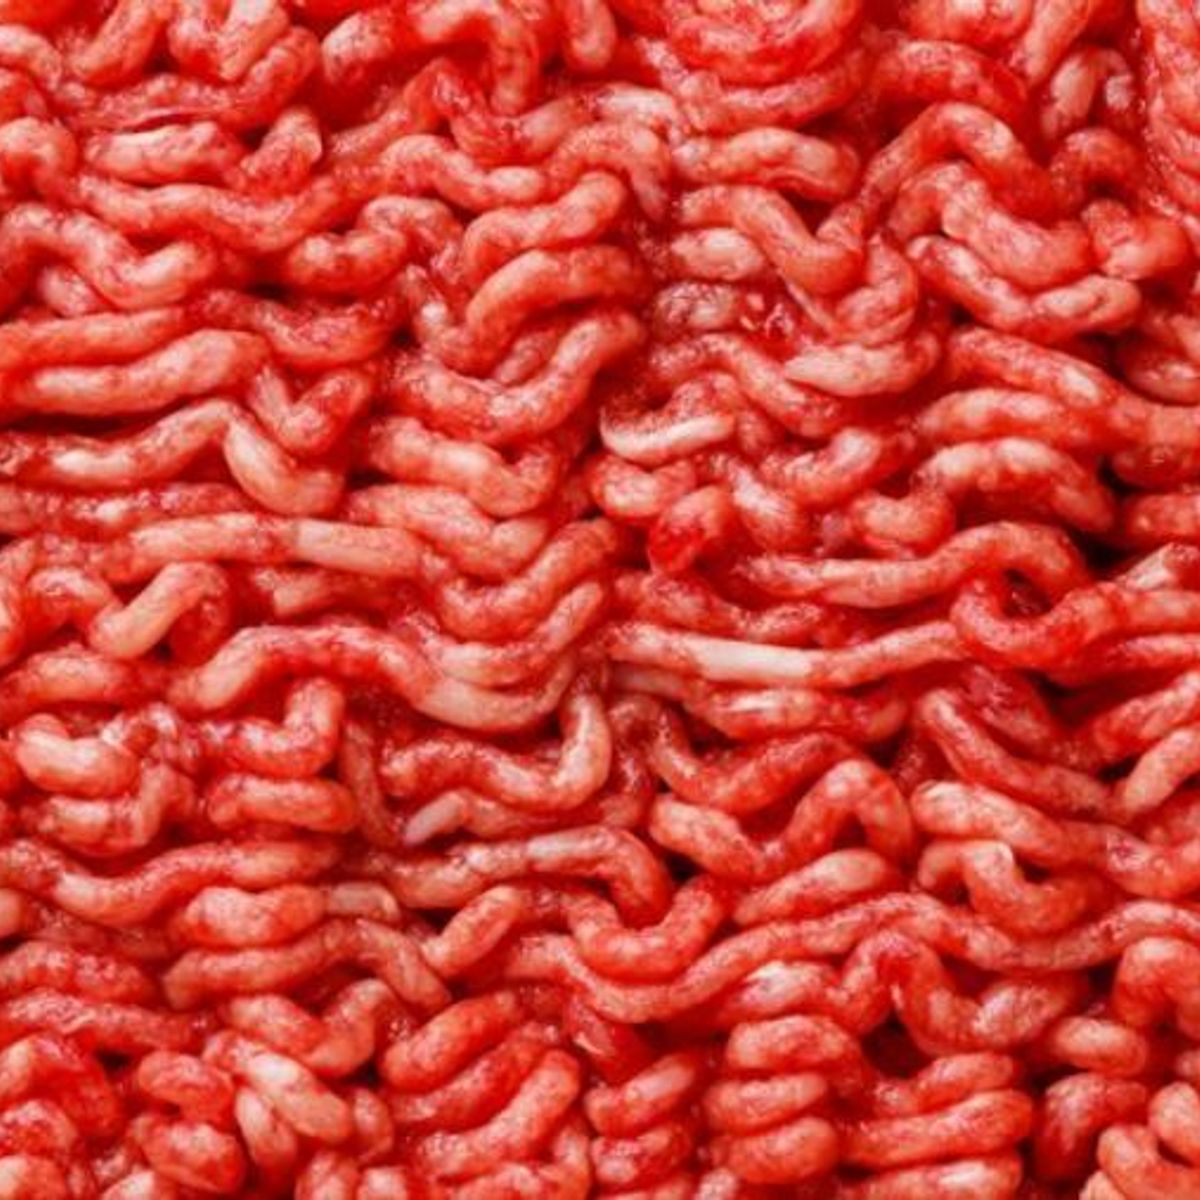 Red Raw Ground Beef Comes Out Stock Photo 1517586899